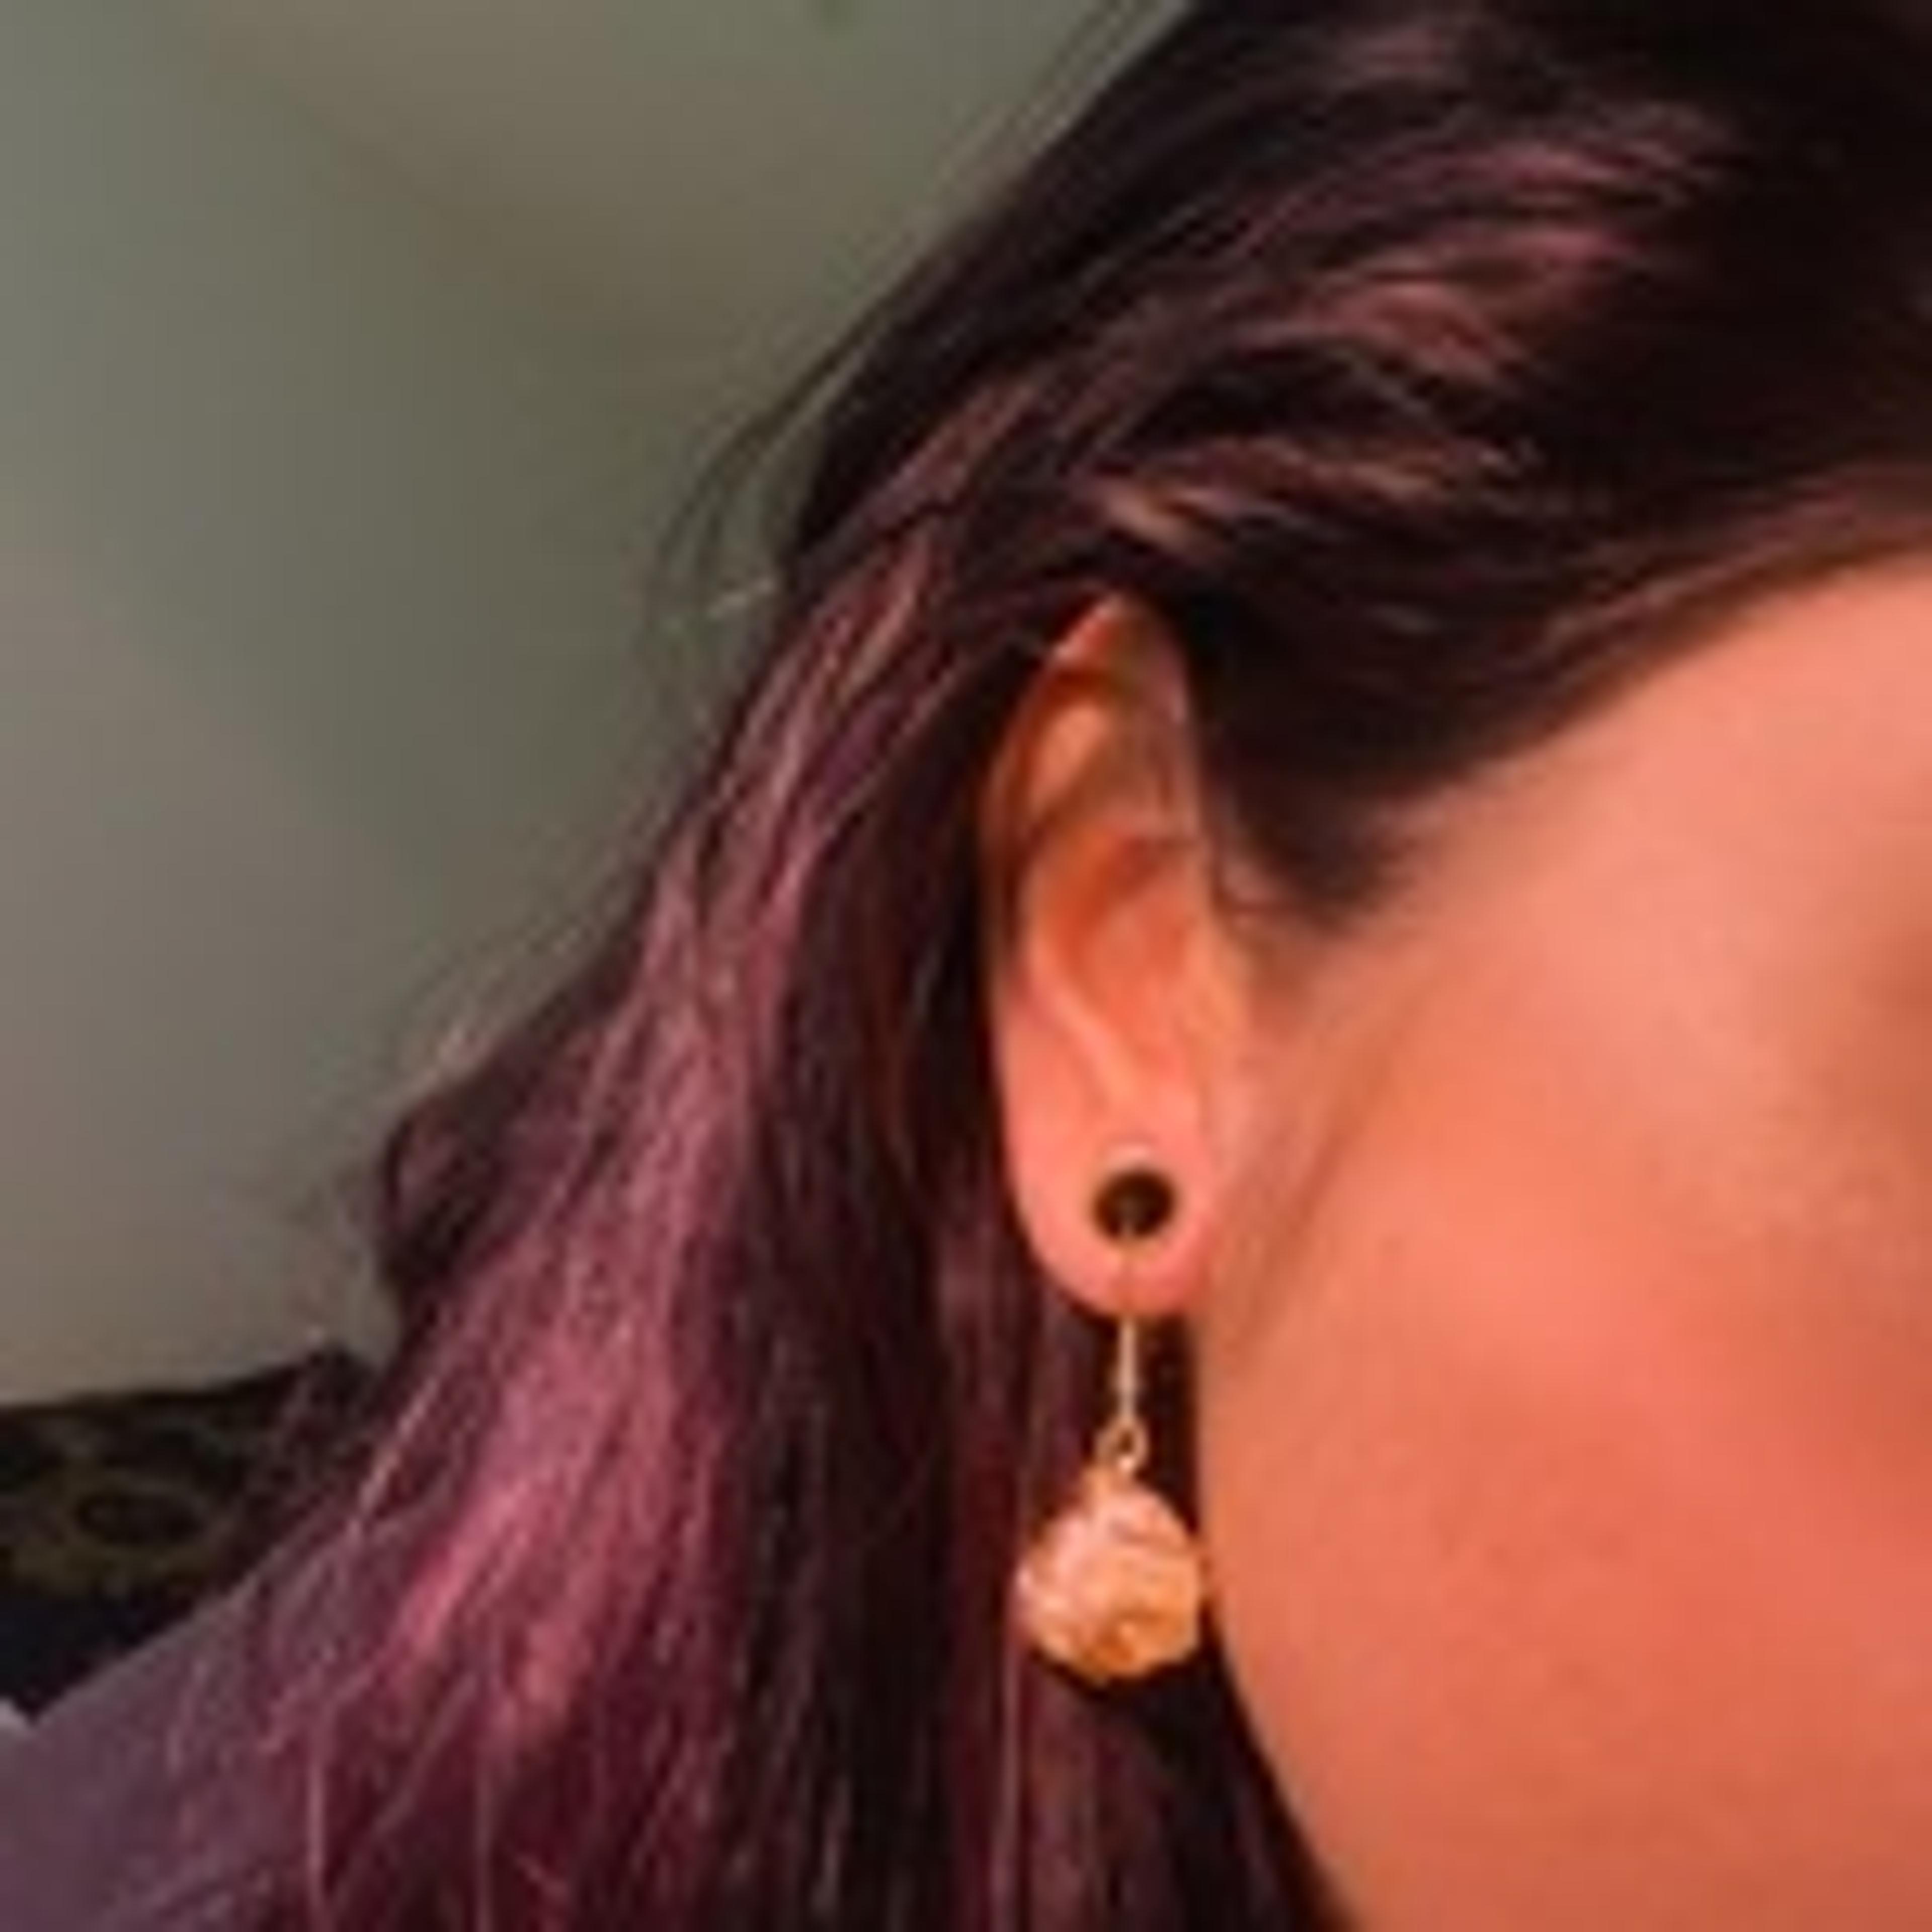 Rose Gold Stainless Steel Double Flare Tunnels (8 Gauge - 1 Inch) | UrbanBodyJewelry.com